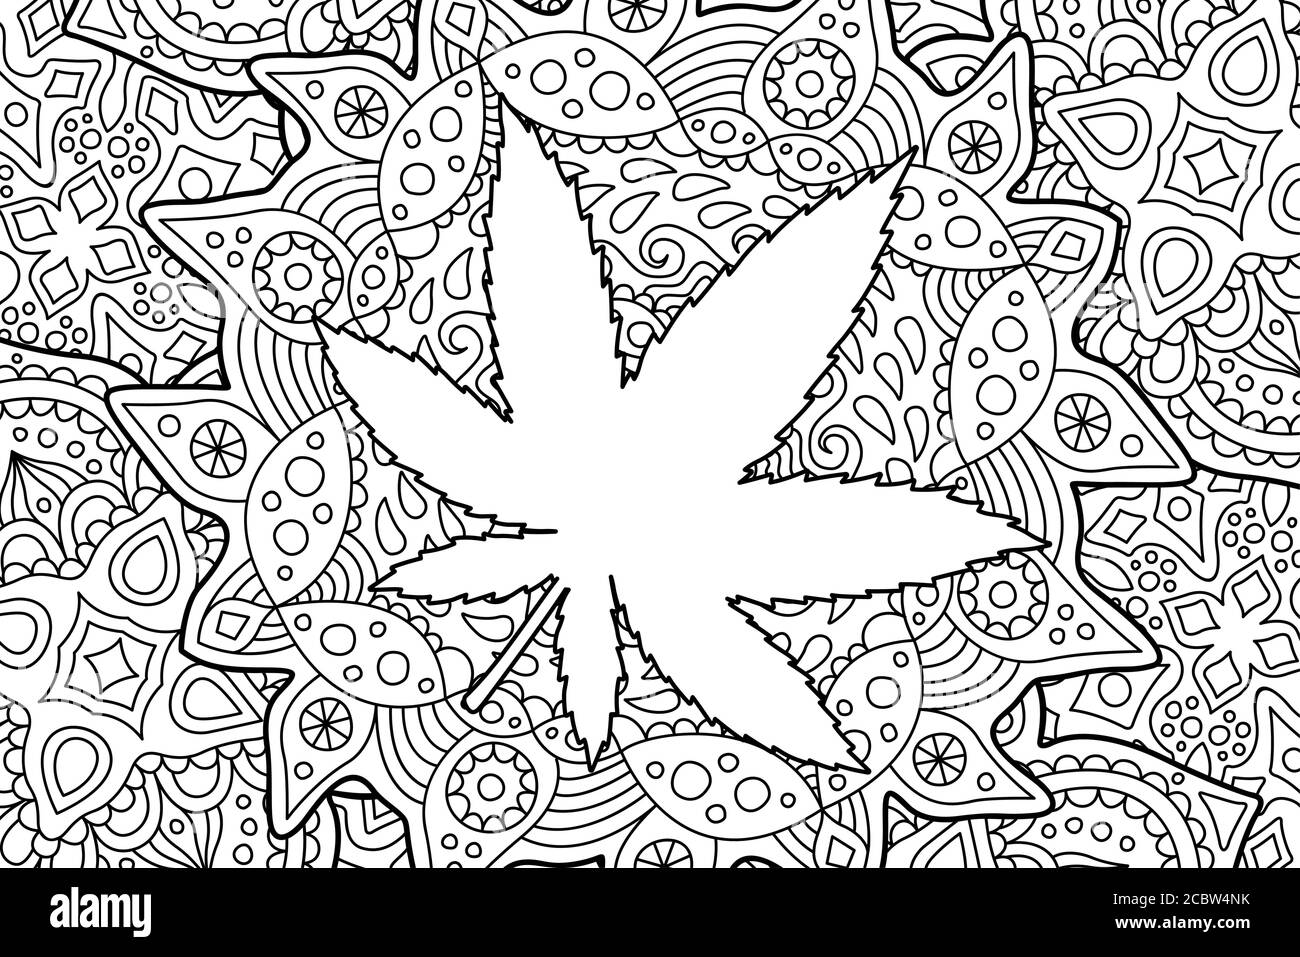 Beautiful adult coloring book page with white cannabis leaf silhouette Stock Vector